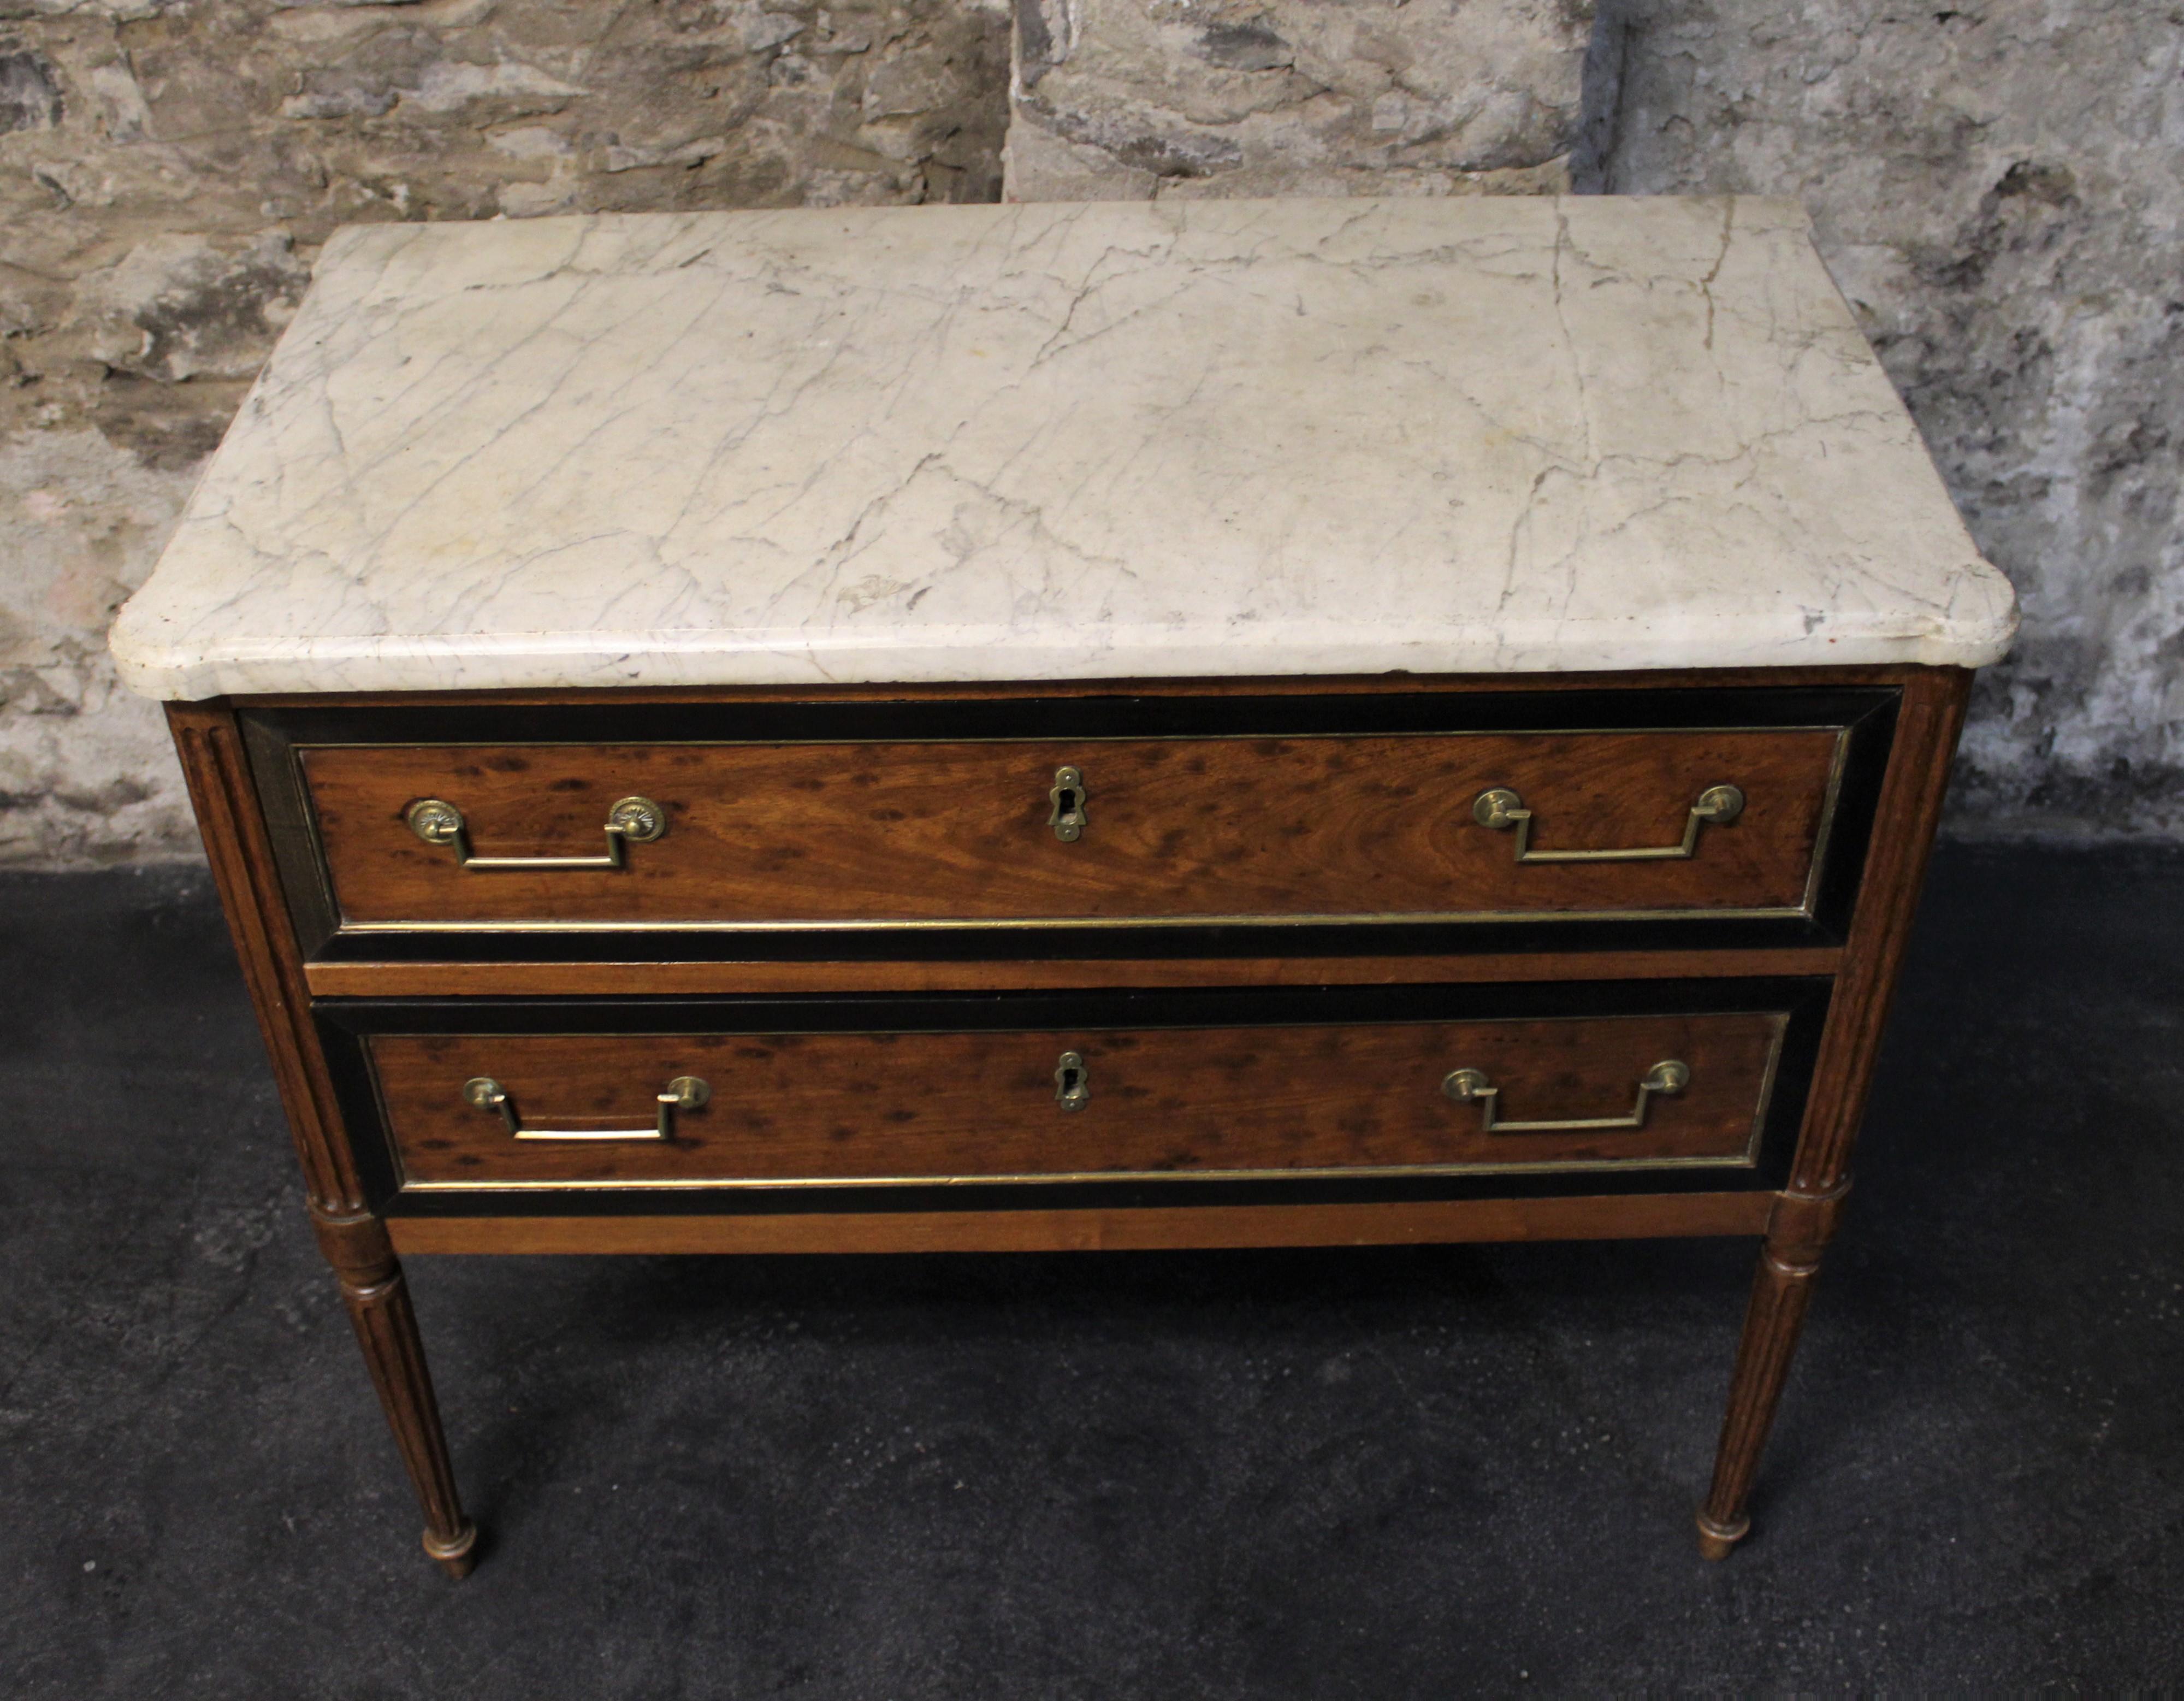 18th century French Louis XVI two-drawer speckled mahogany commode with marble top.